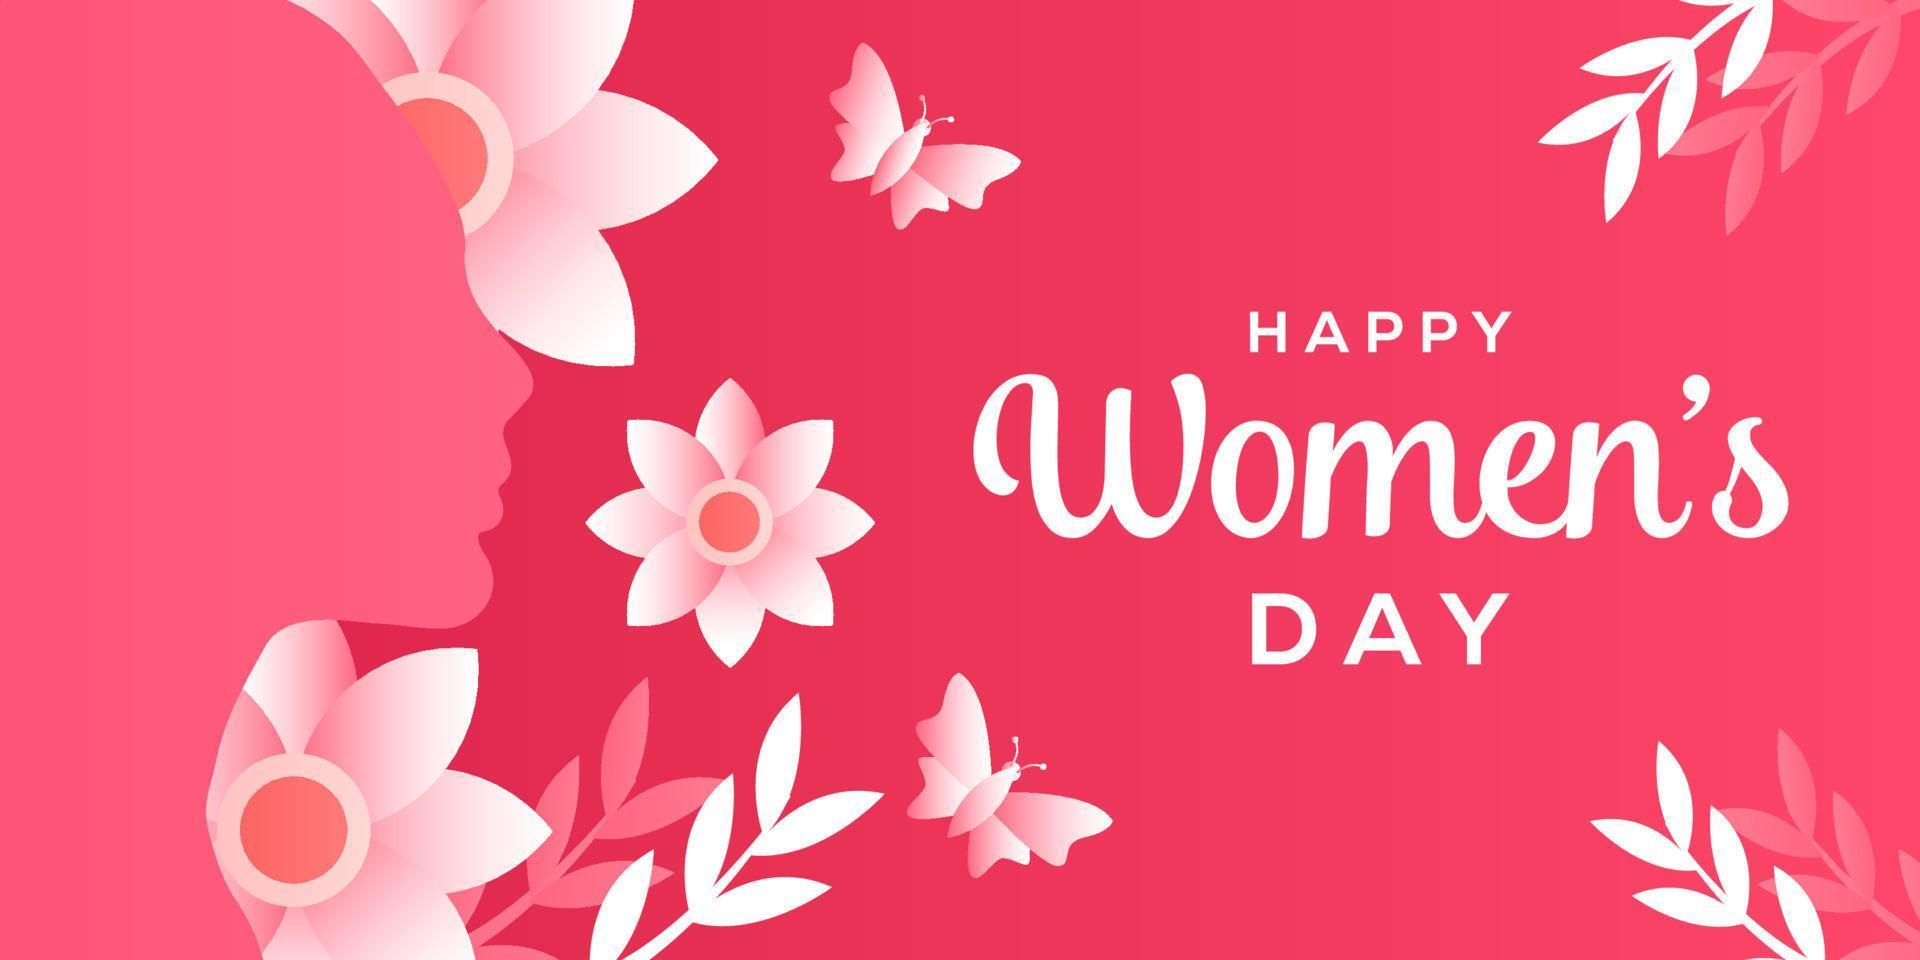 happy women's day illustration paper cut style with woman ...